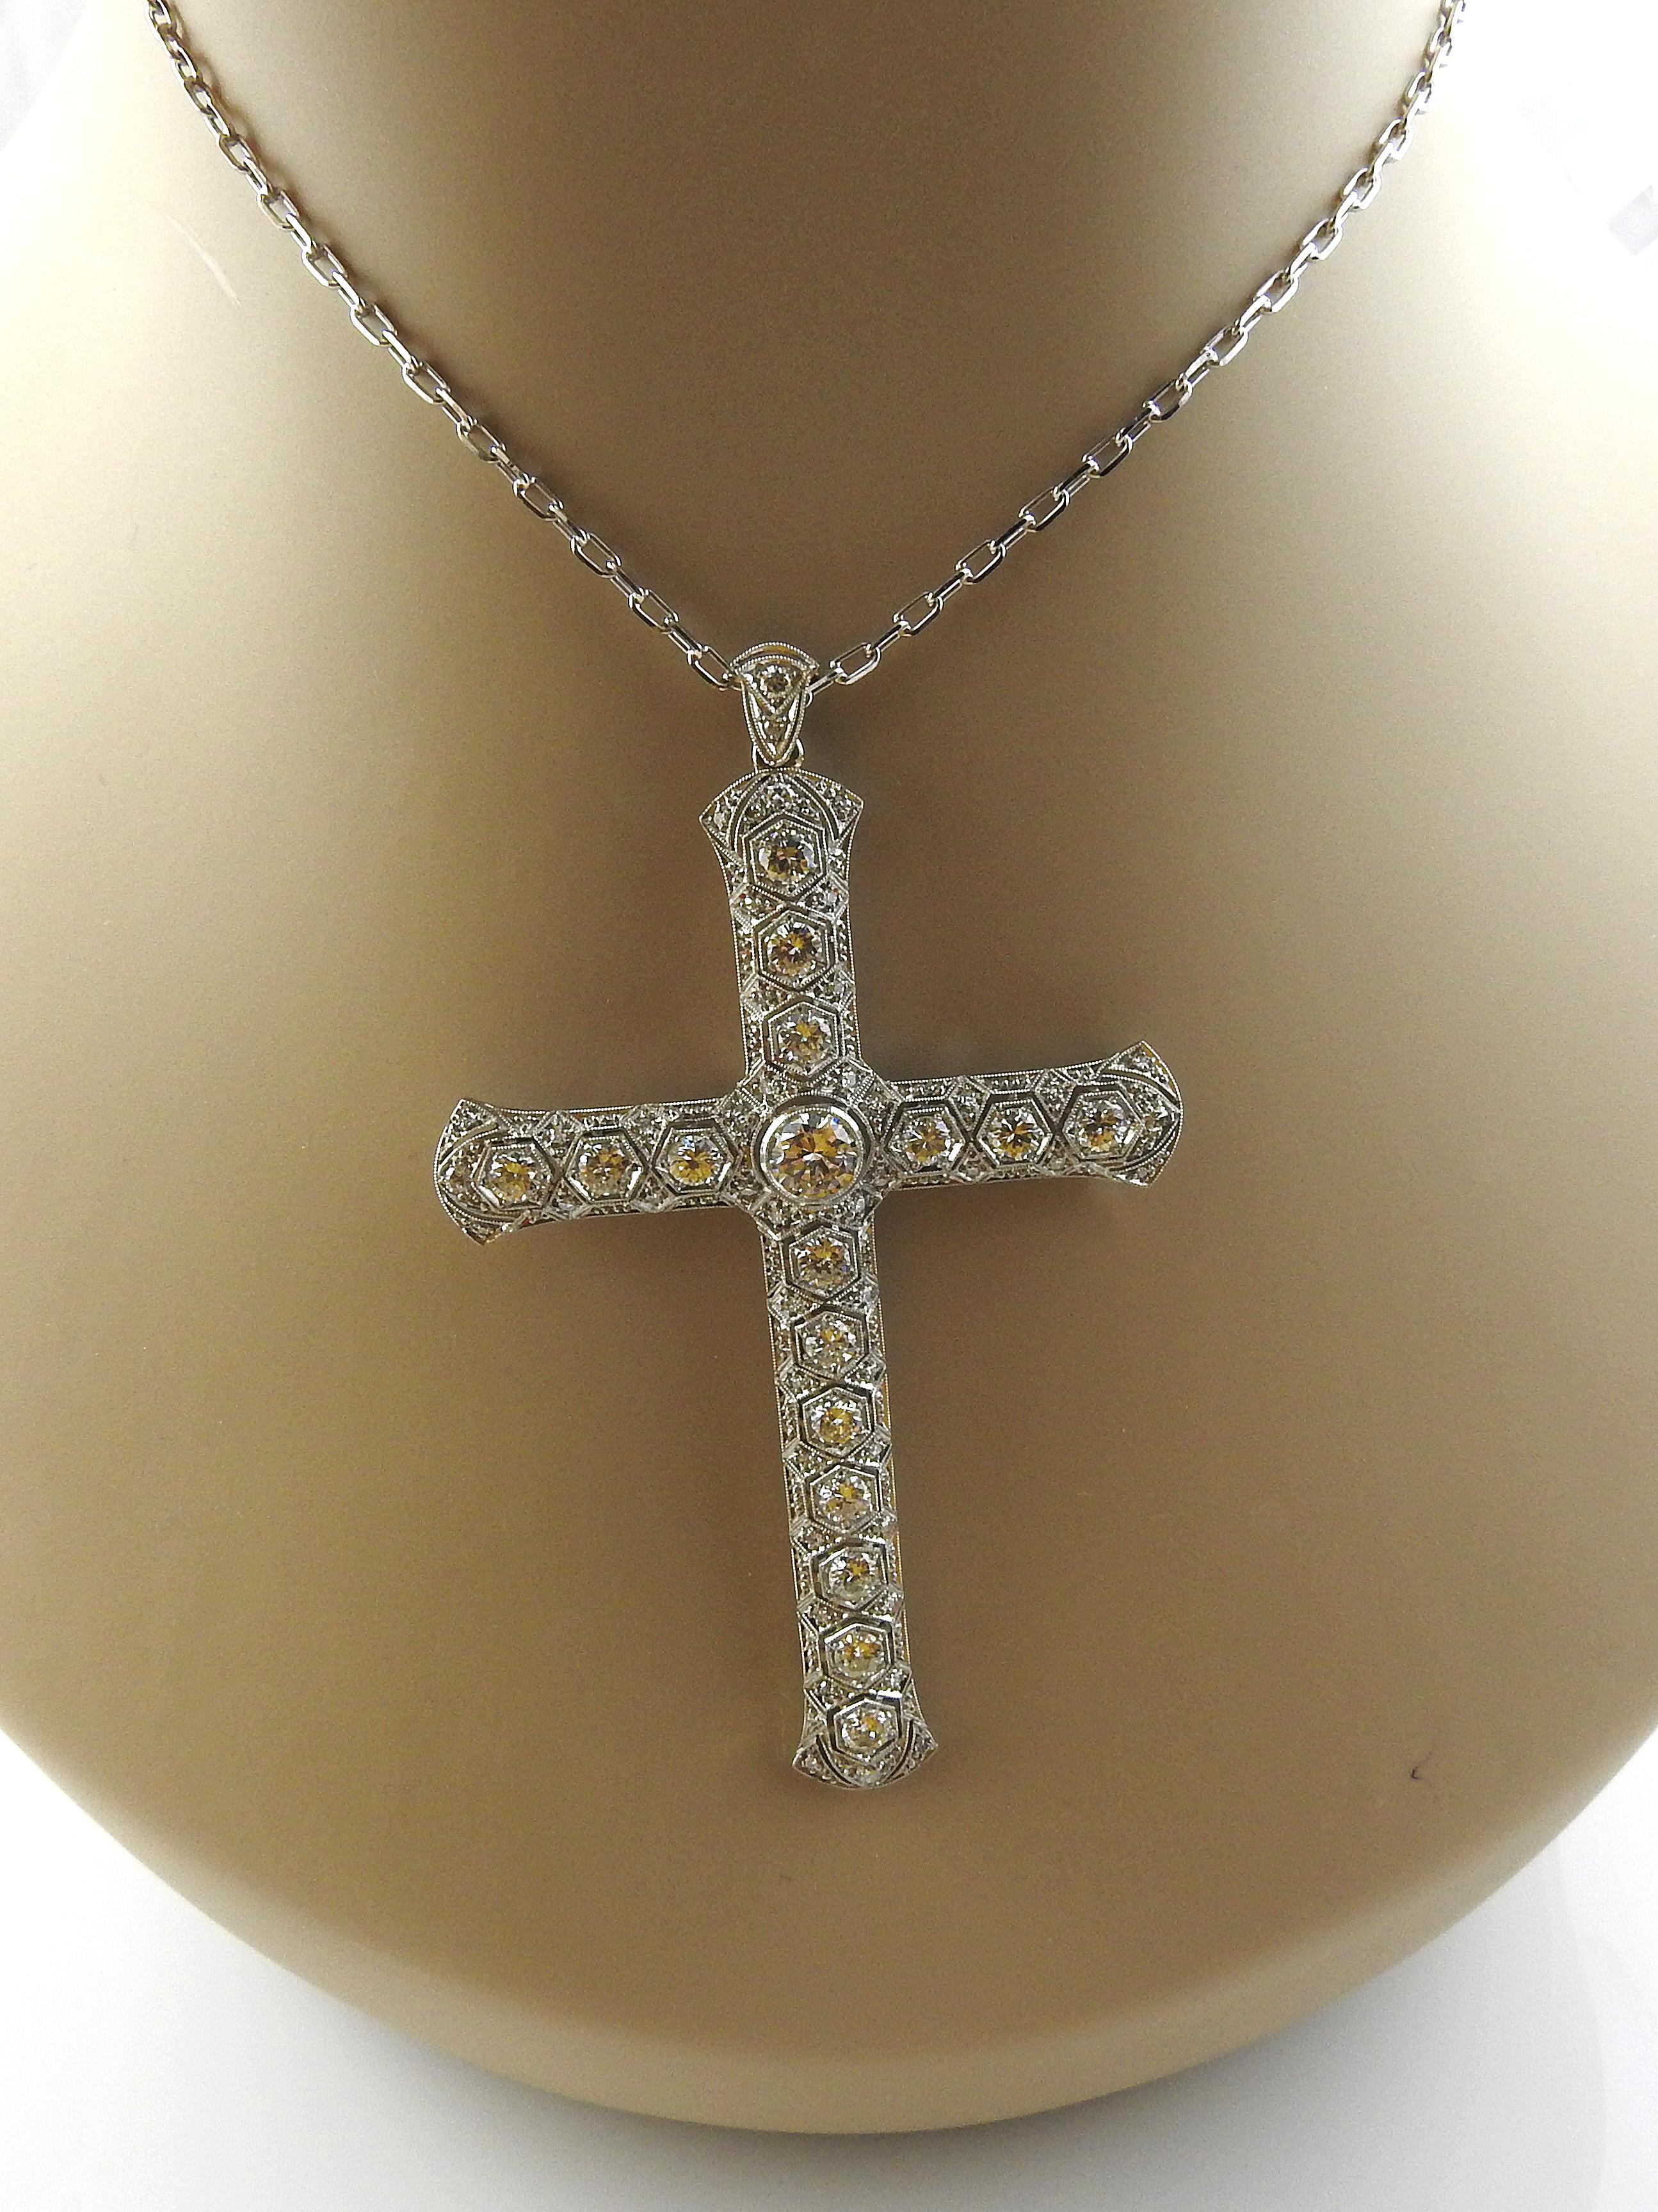 Vintage 14K White Gold Large Diamond Cross Pendant Necklace

This gorgeous statement piece is set with 62 round diamonds totally approx. 3.51 carats

Larger diamonds are round brilliant stones, with smaller single cut stones accenting the